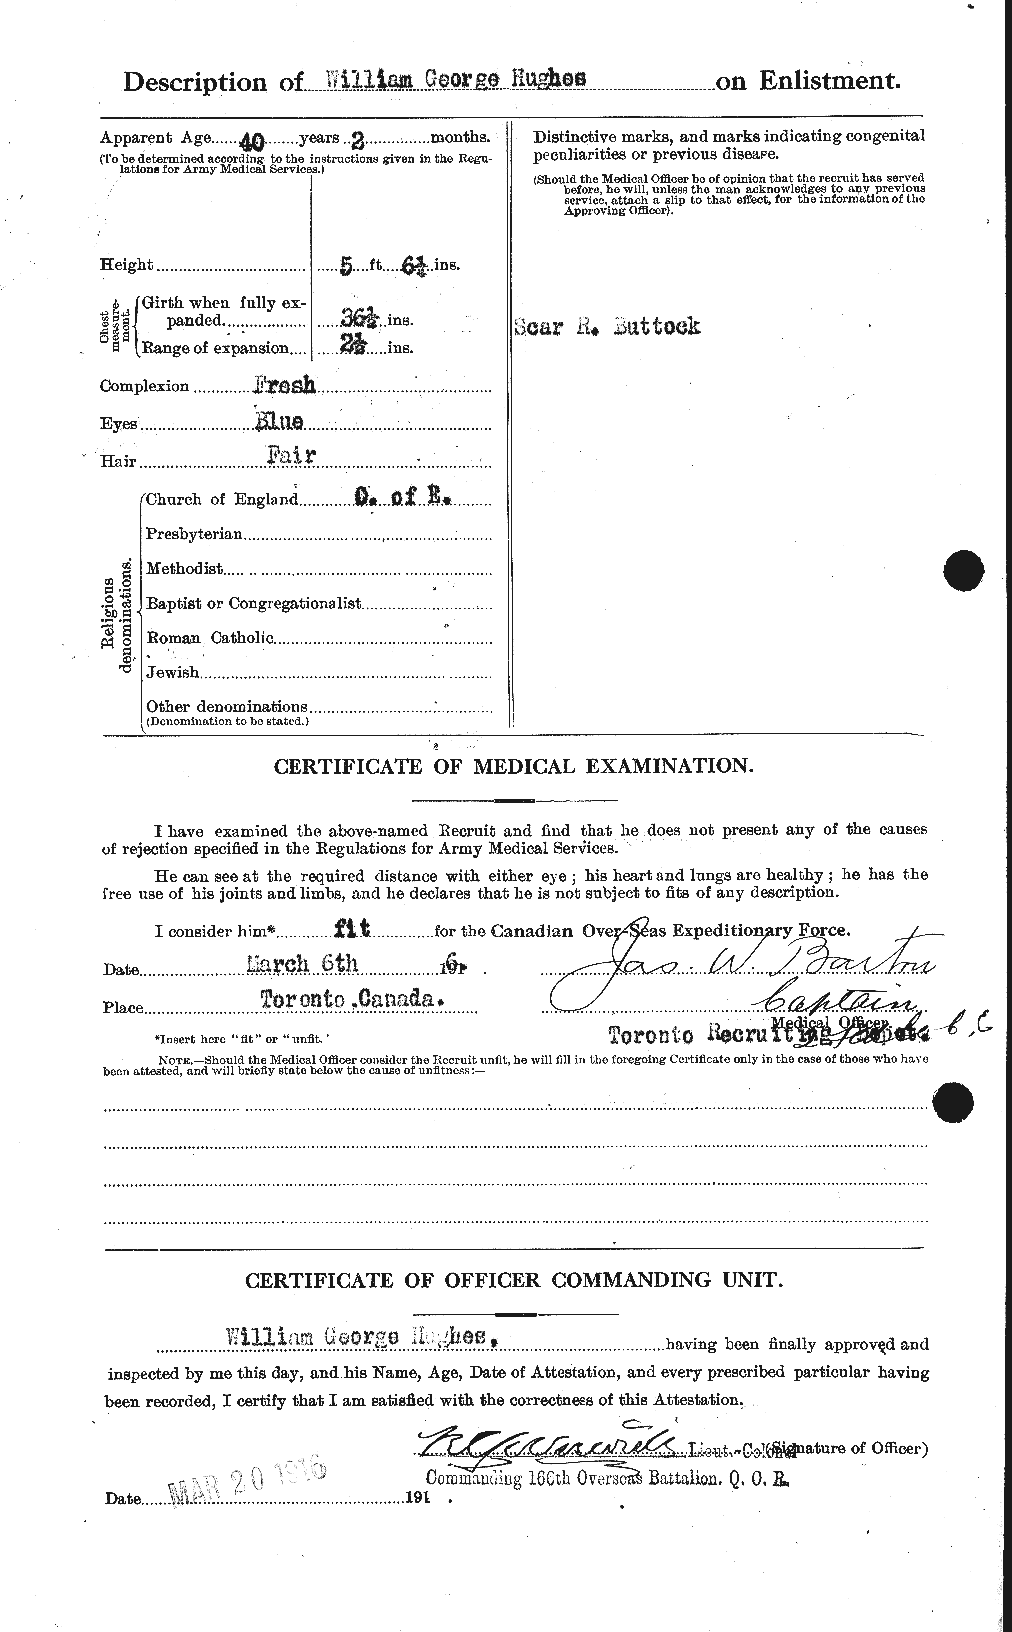 Personnel Records of the First World War - CEF 405925b